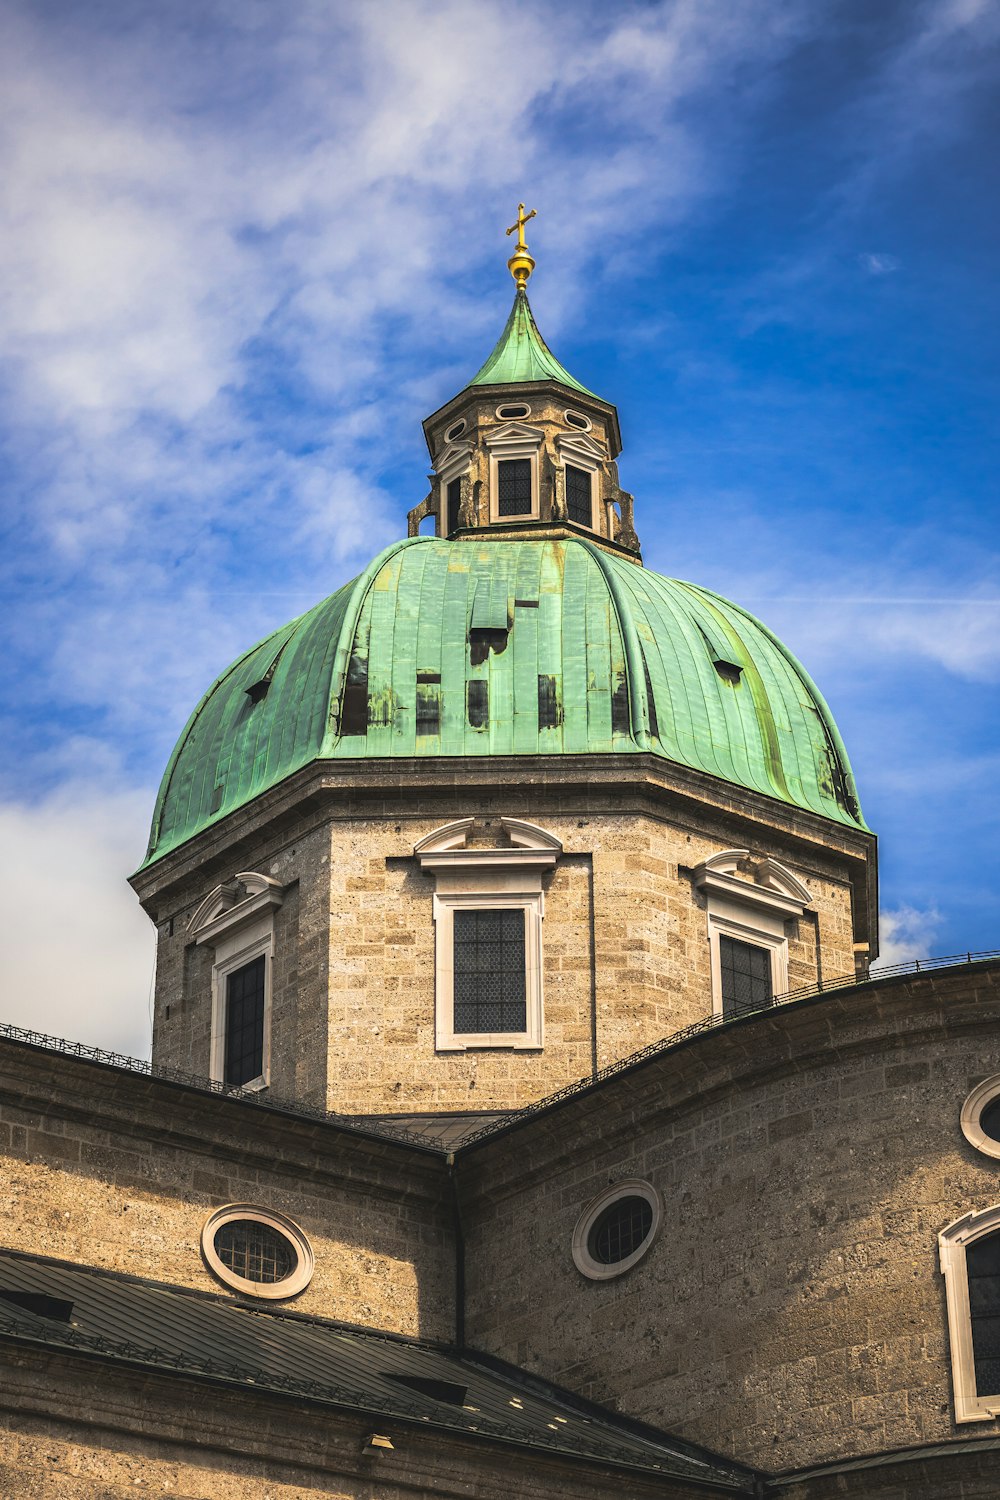 a green dome on top of a building